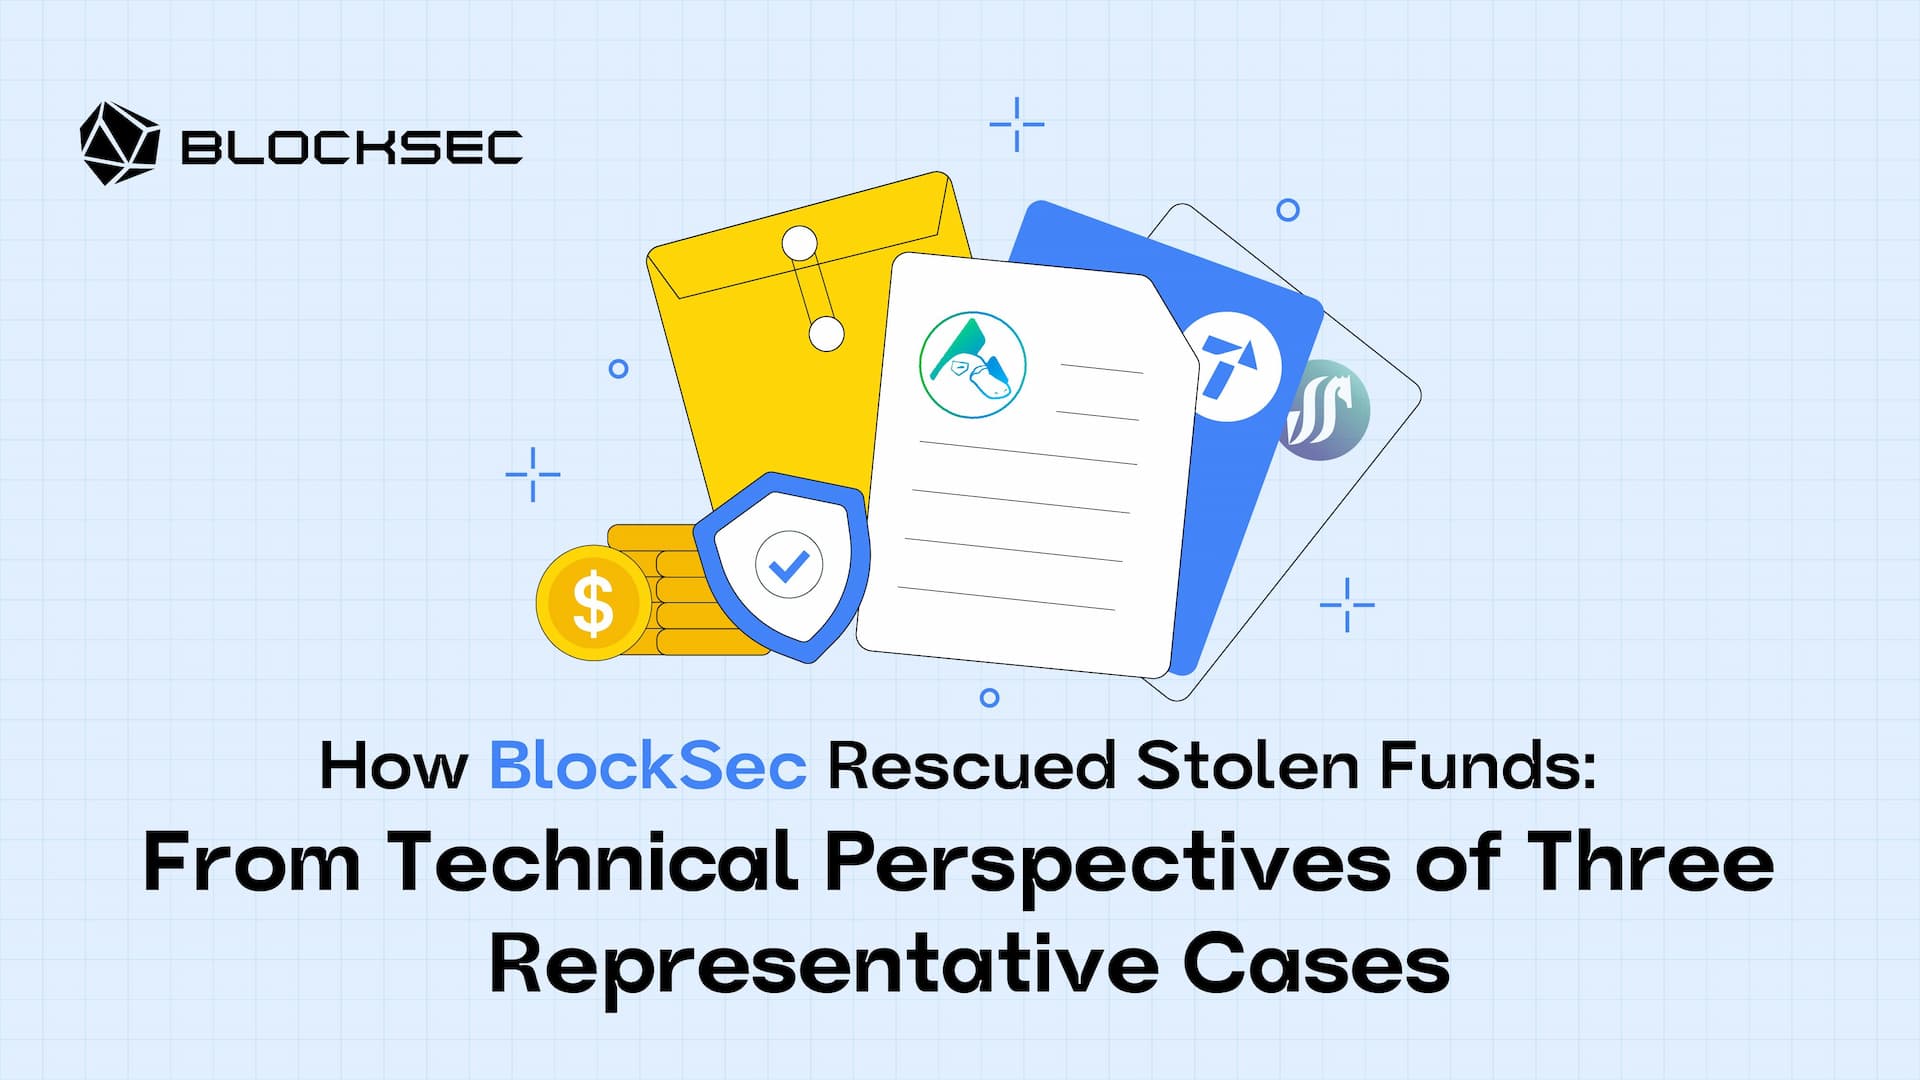 How BlockSec Rescued Stolen Funds: From Technical Perspectives of Three Representative Cases